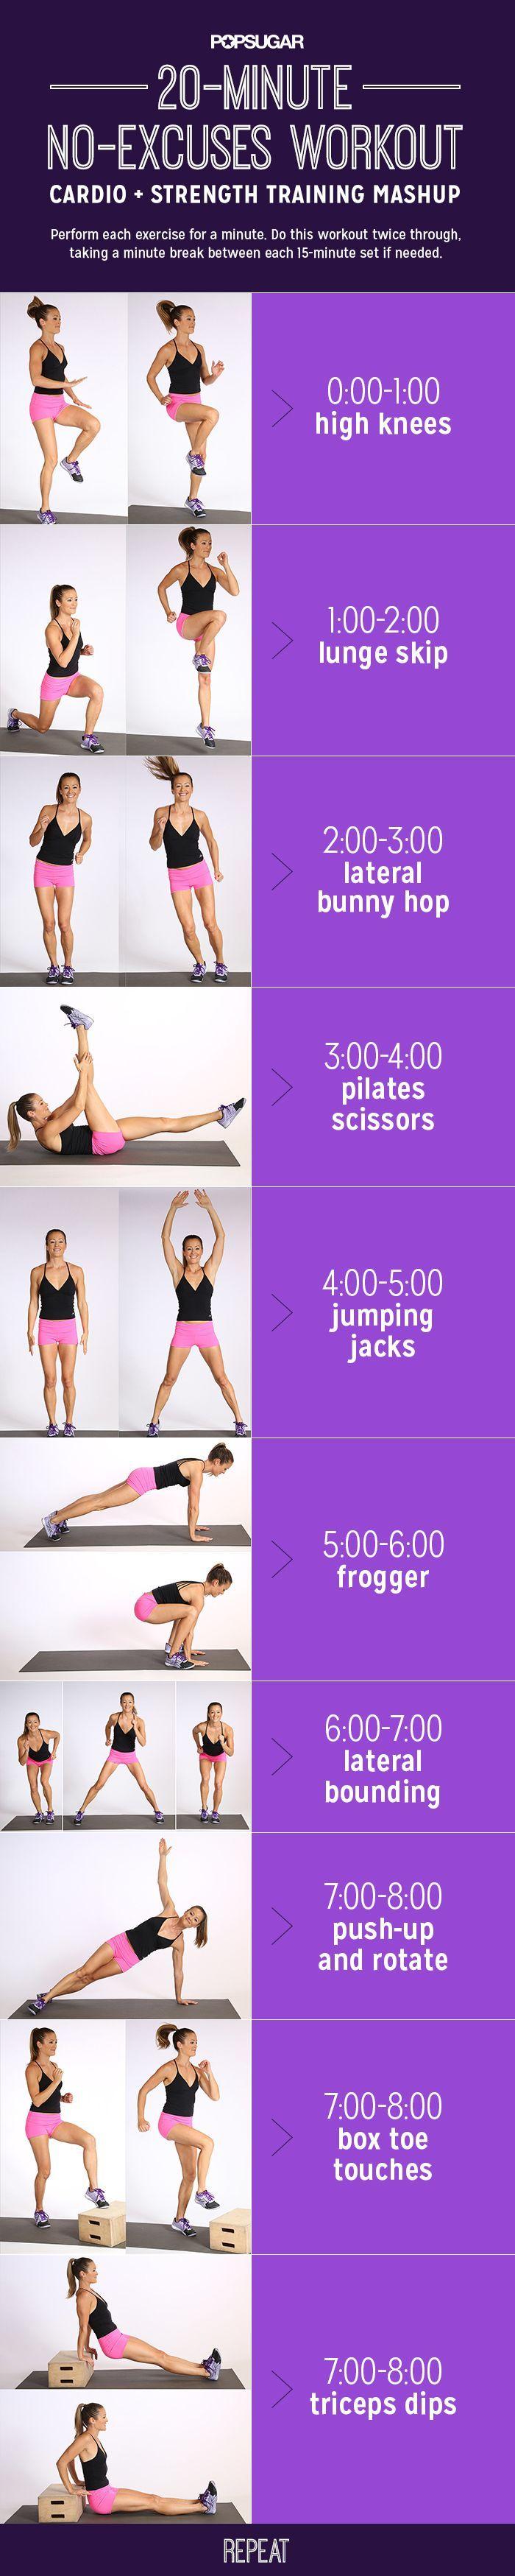 Wedding - 10 Workouts You Can Do In 20 Minutes Or Less